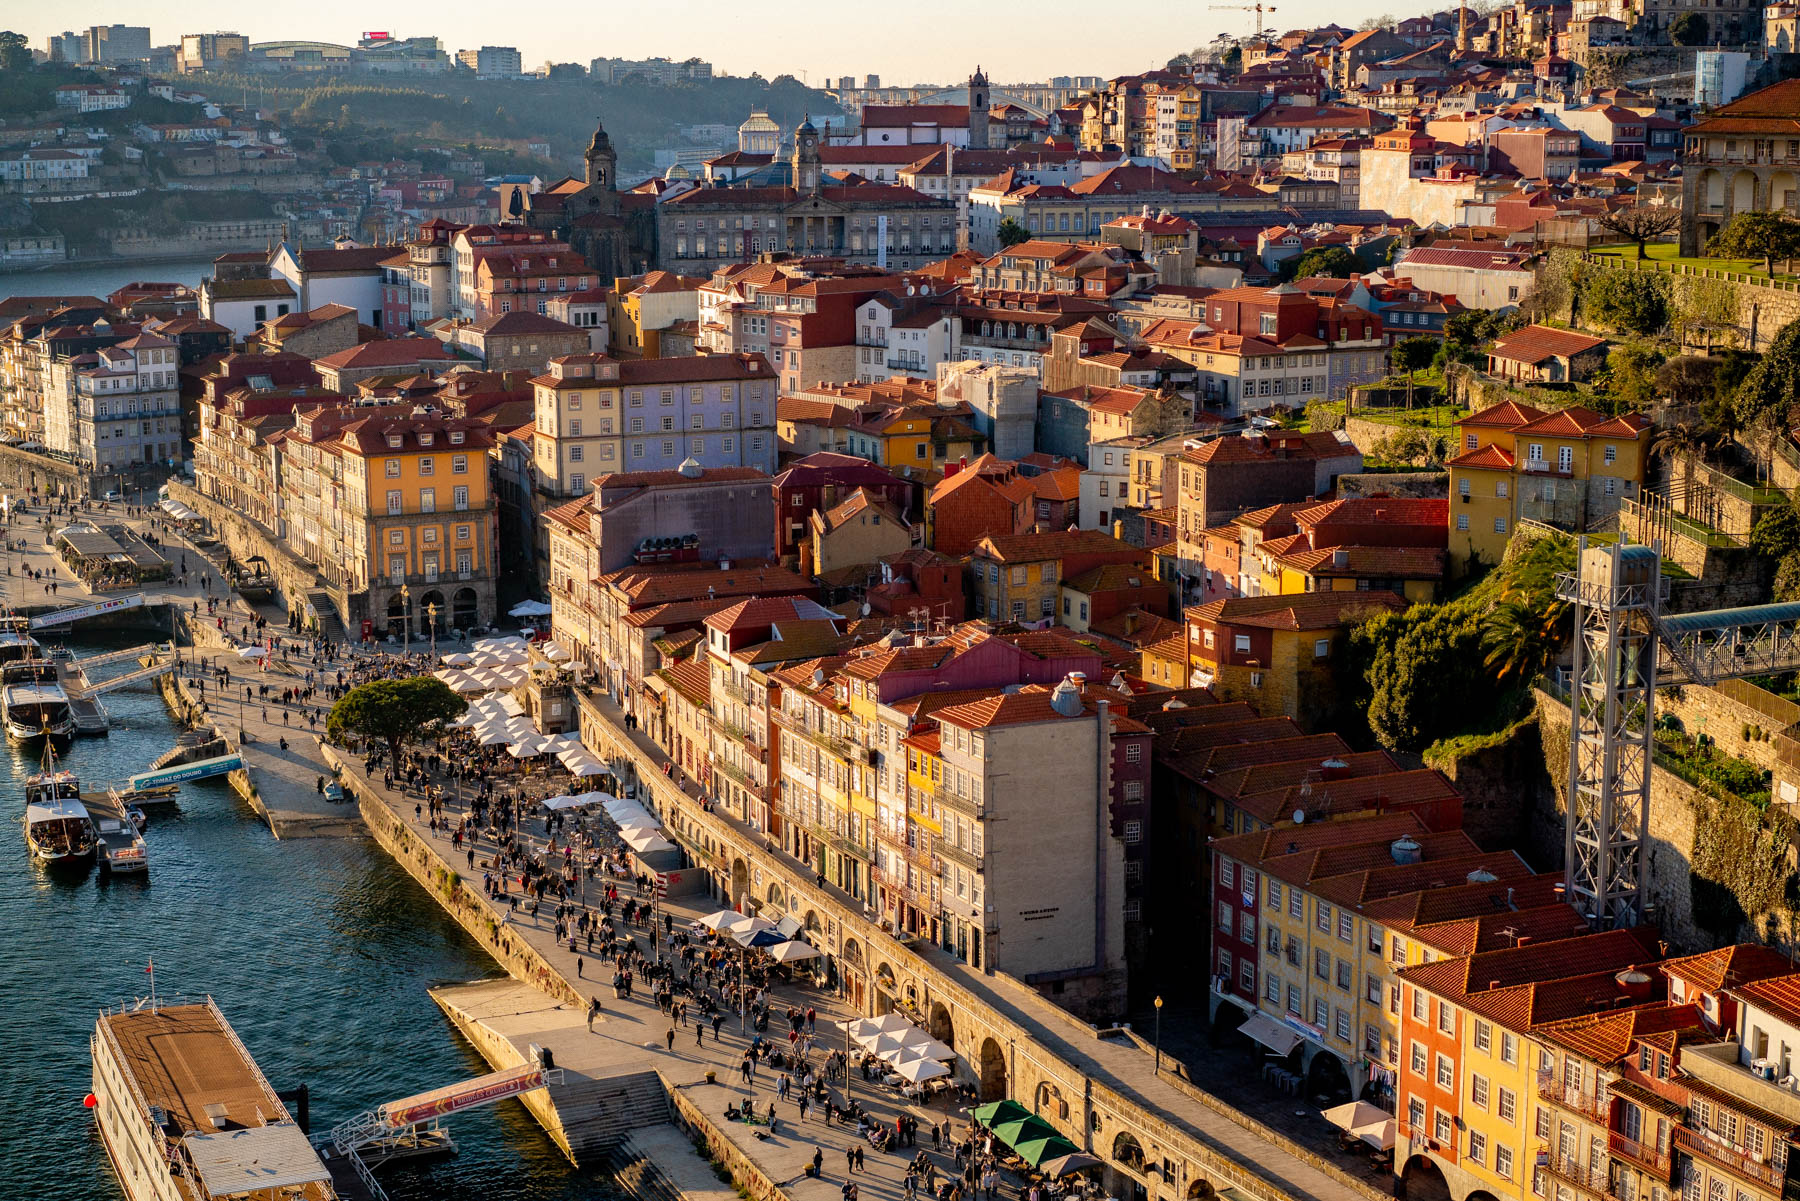 Best Things To Do in Porto, Portugal